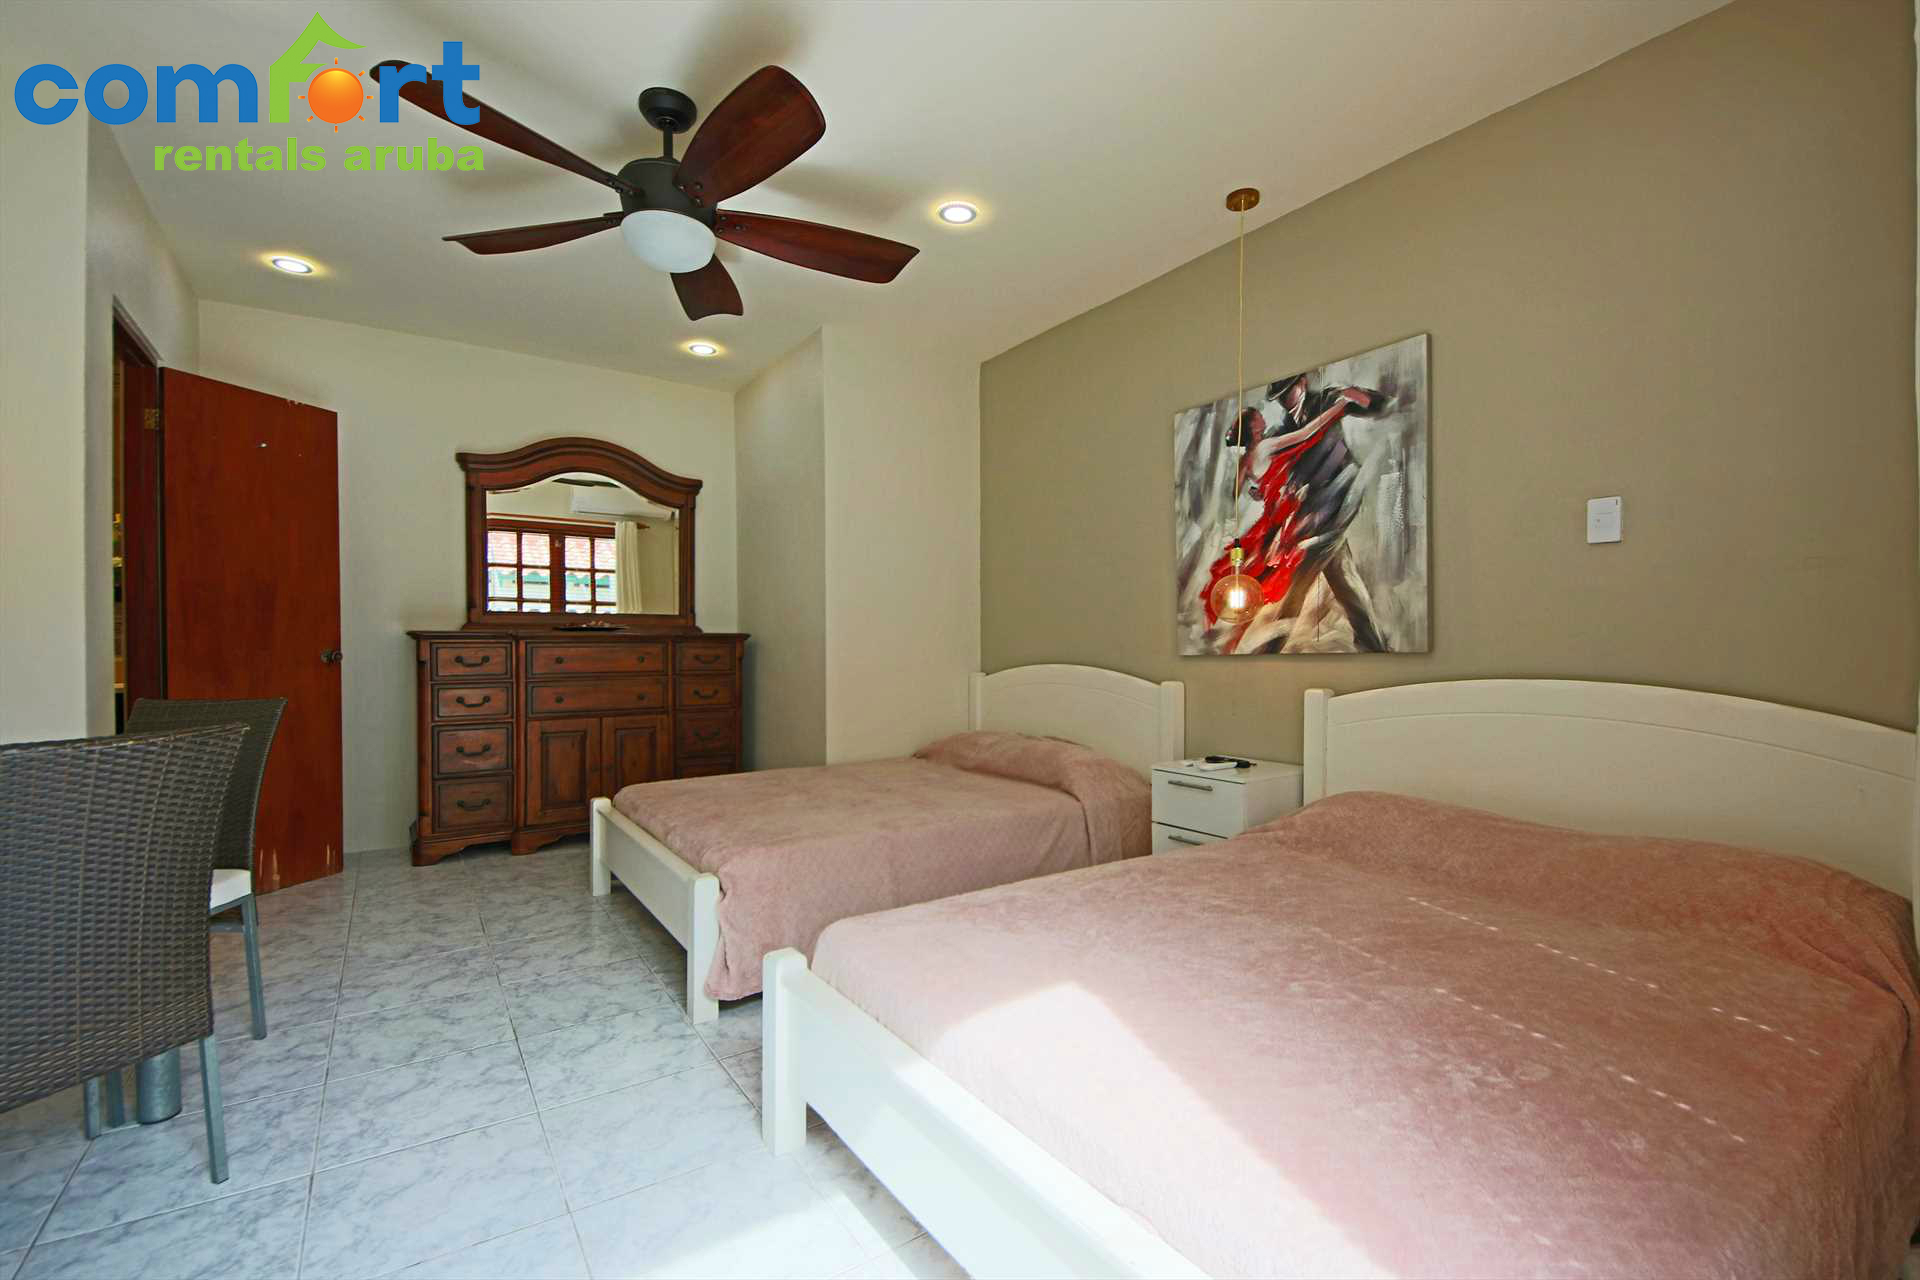 Fifth bedroom is located in the guesthouse by the pool (on the backside) and has 2 double-size beds